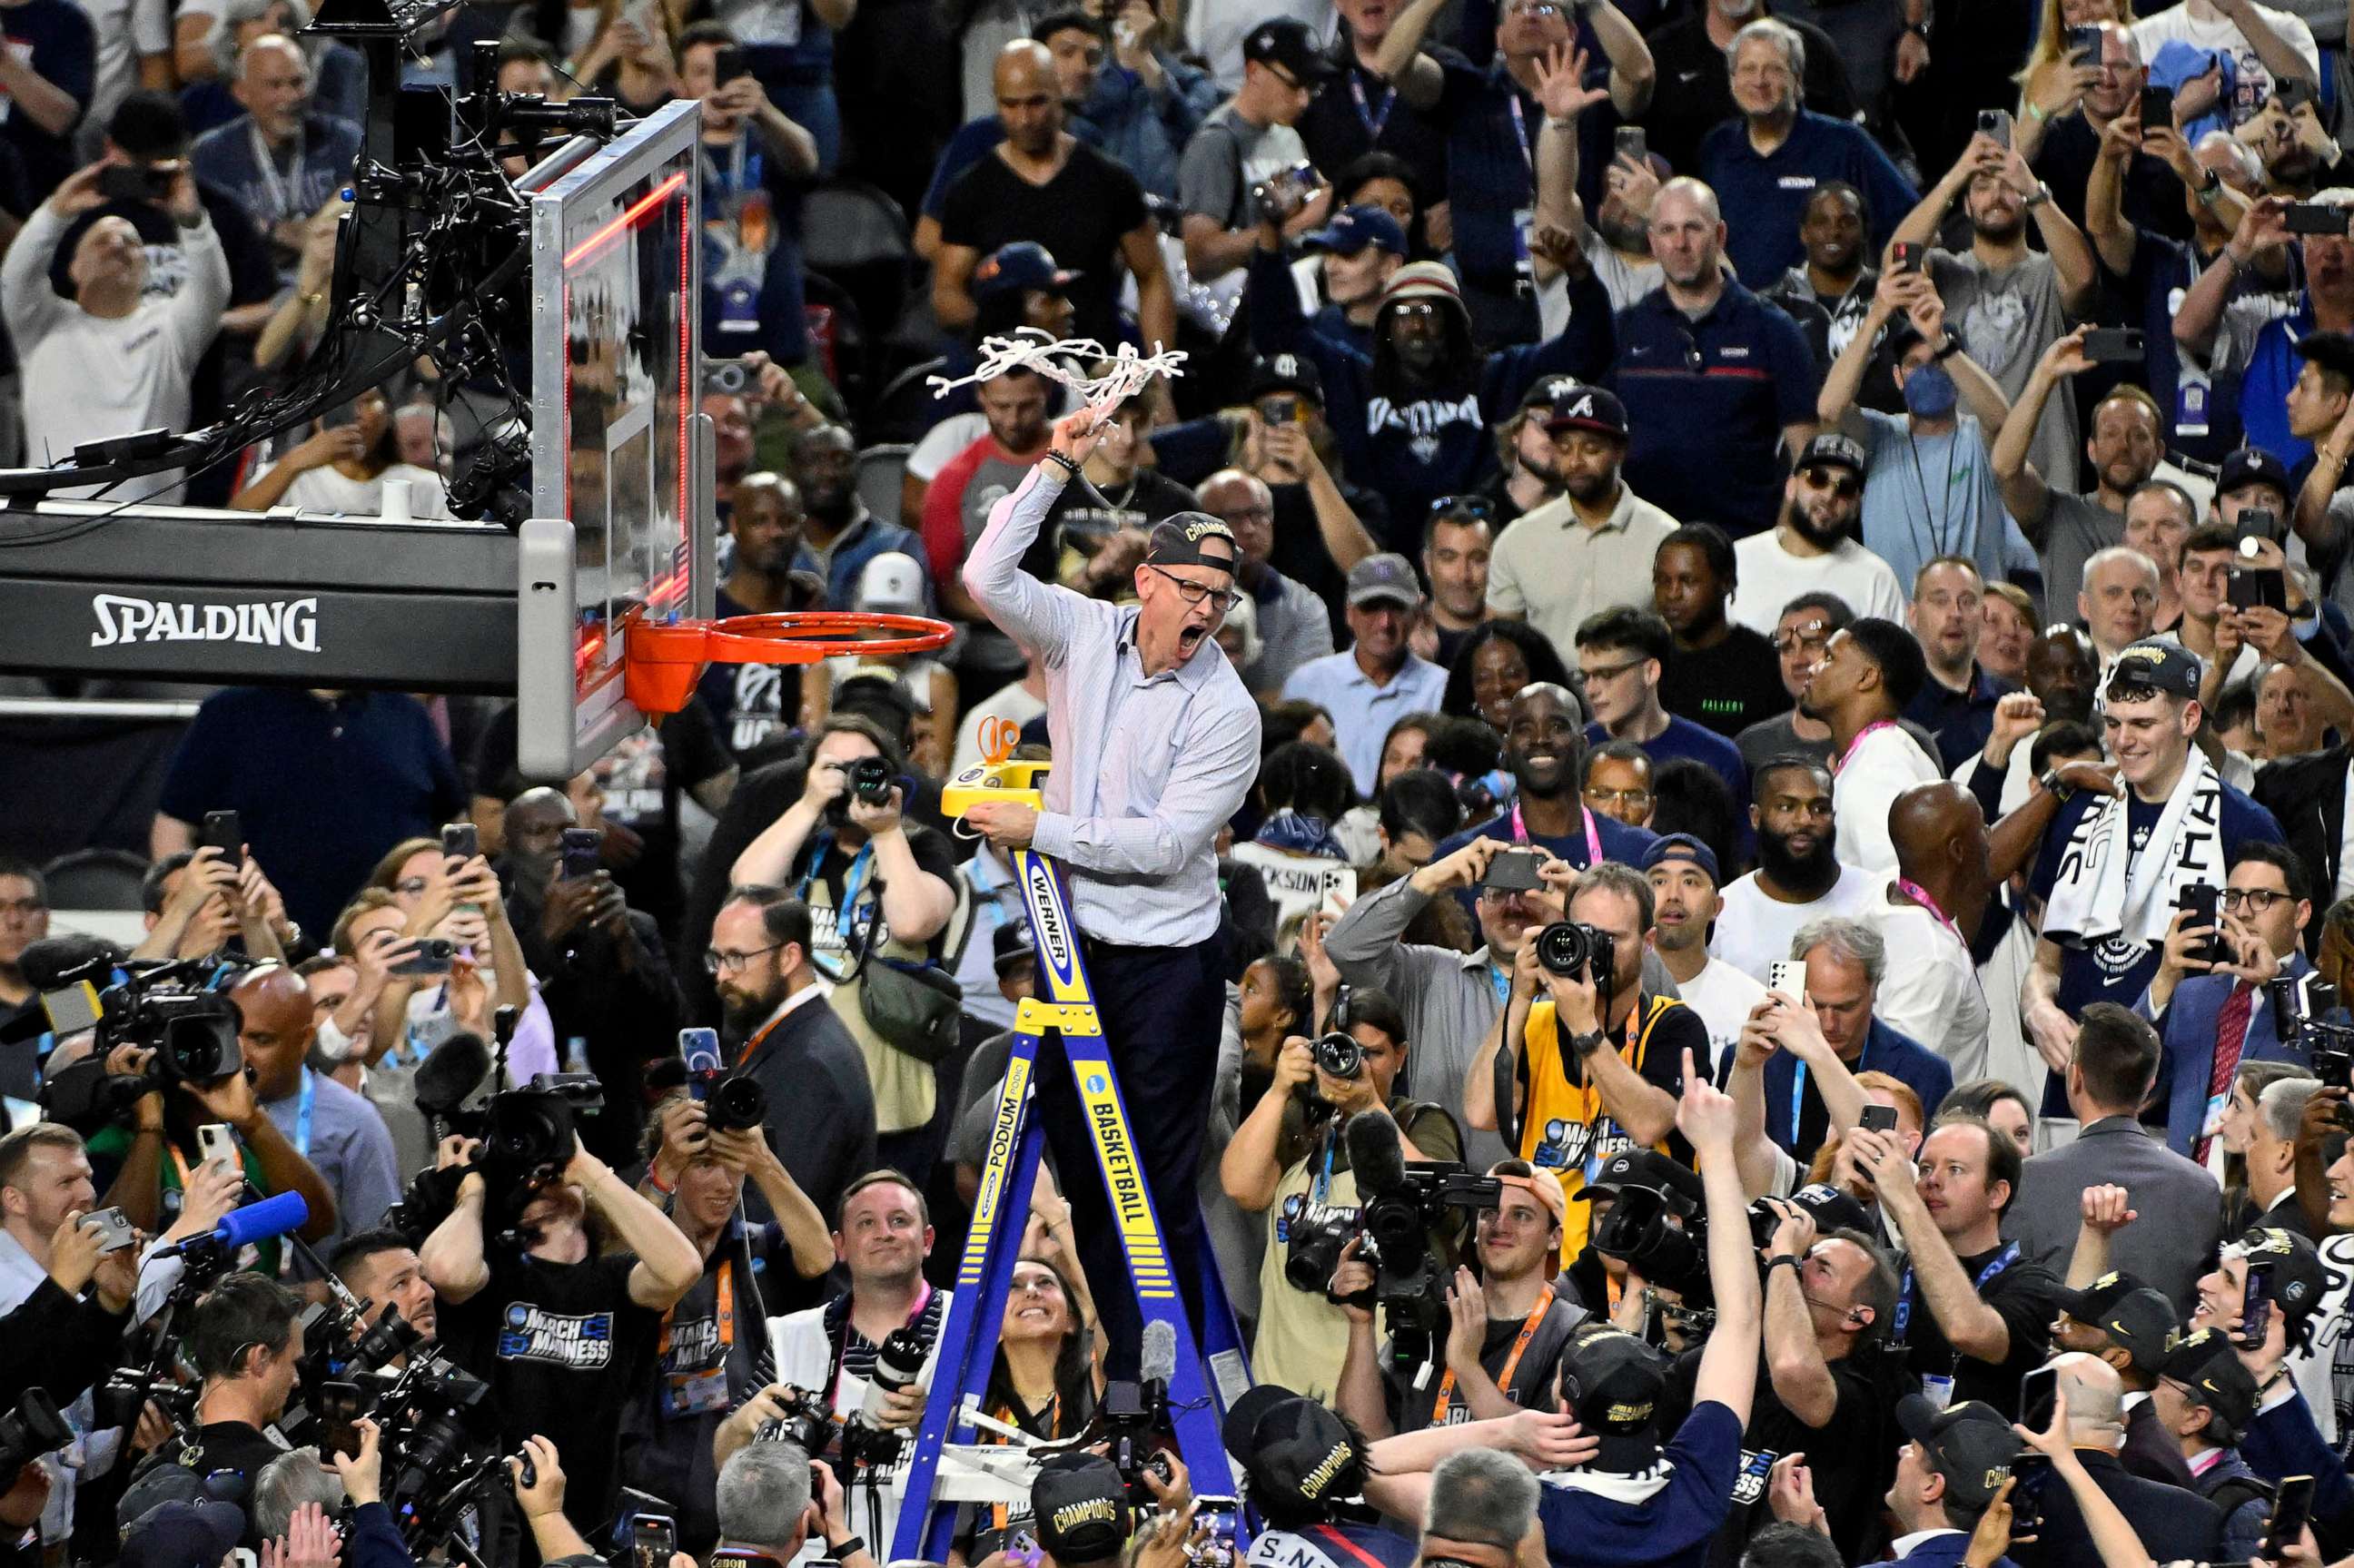 PHOTO: Head coach Dan Hurley of the Connecticut Huskies reacts as he cuts down the net after defeating the San Diego State Aztecs 76-59 during the NCAA Men's Basketball Tournament National Championship game at NRG Stadium, April 03, 2023 in Houston.